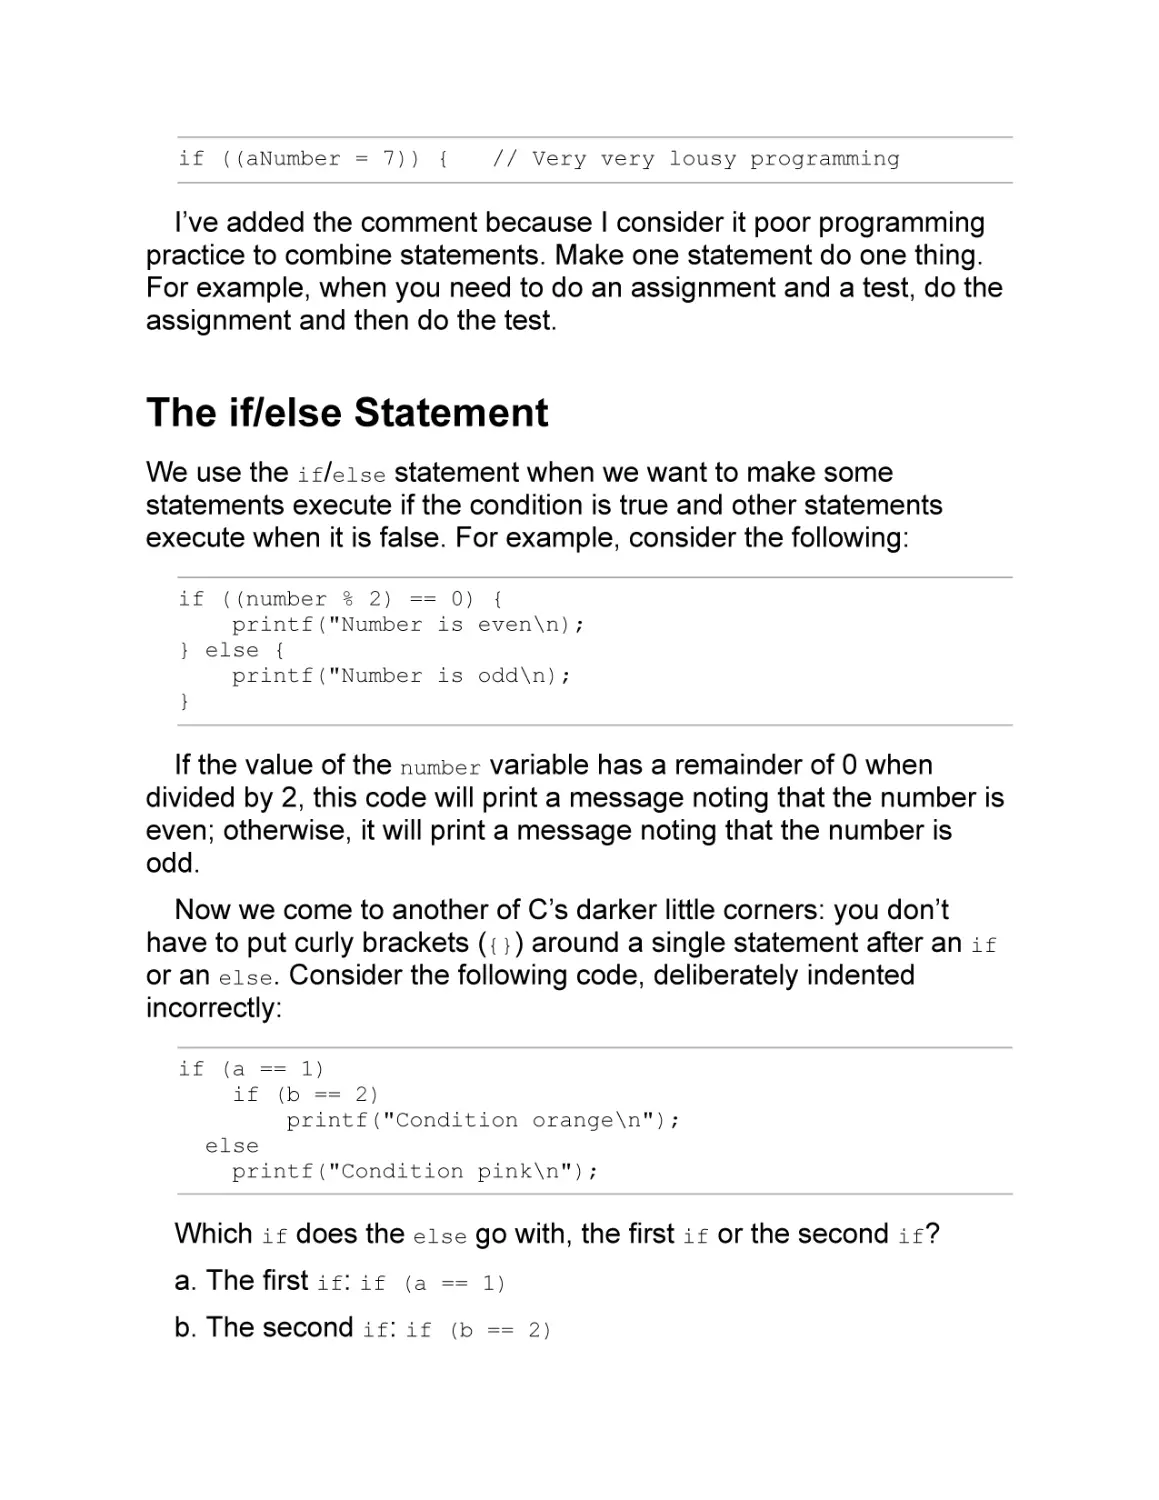 The if/else Statement